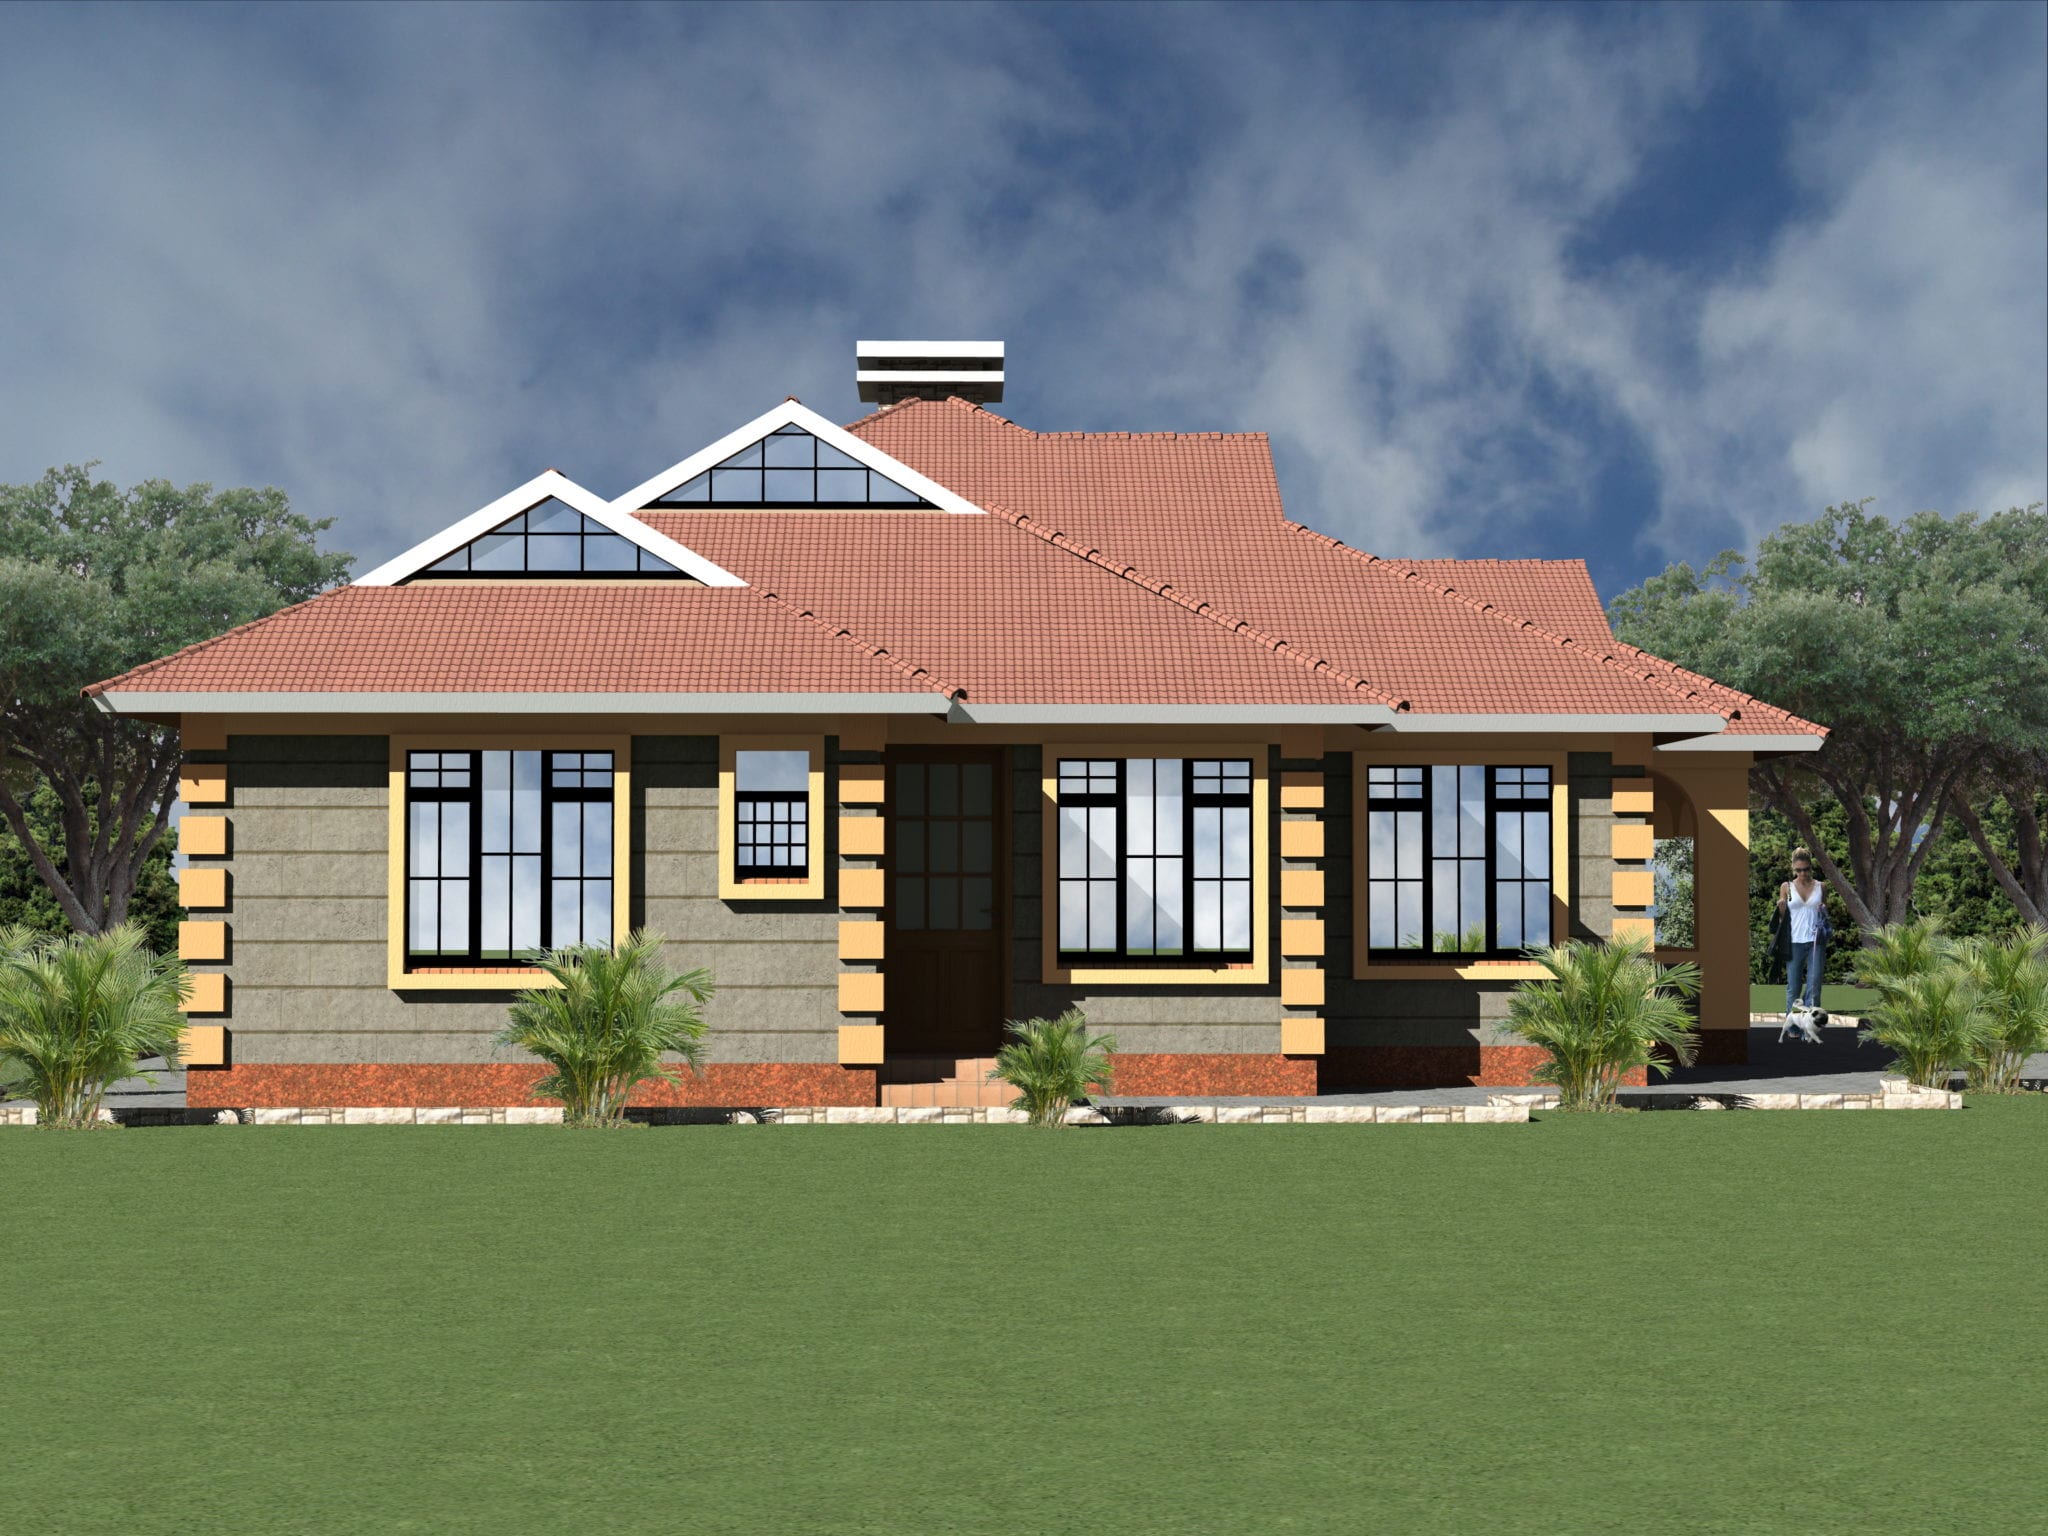  4  Bedroom Single Story  House  Plan  Designs  HPD Consult